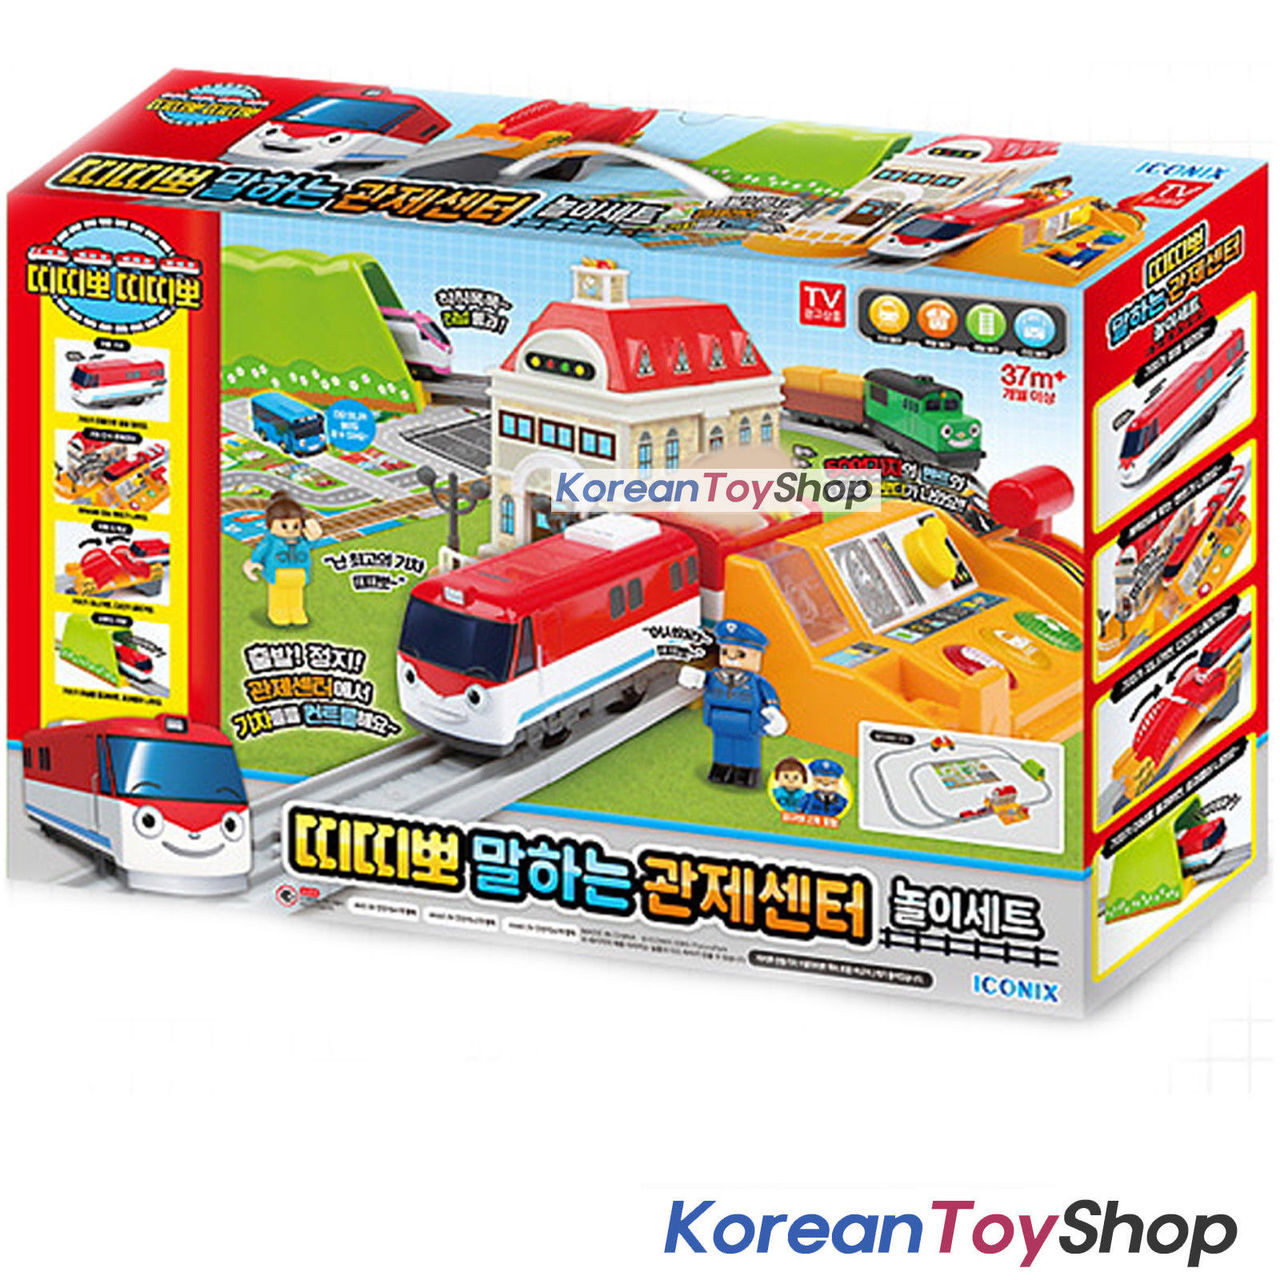 videos of toy trains for kids